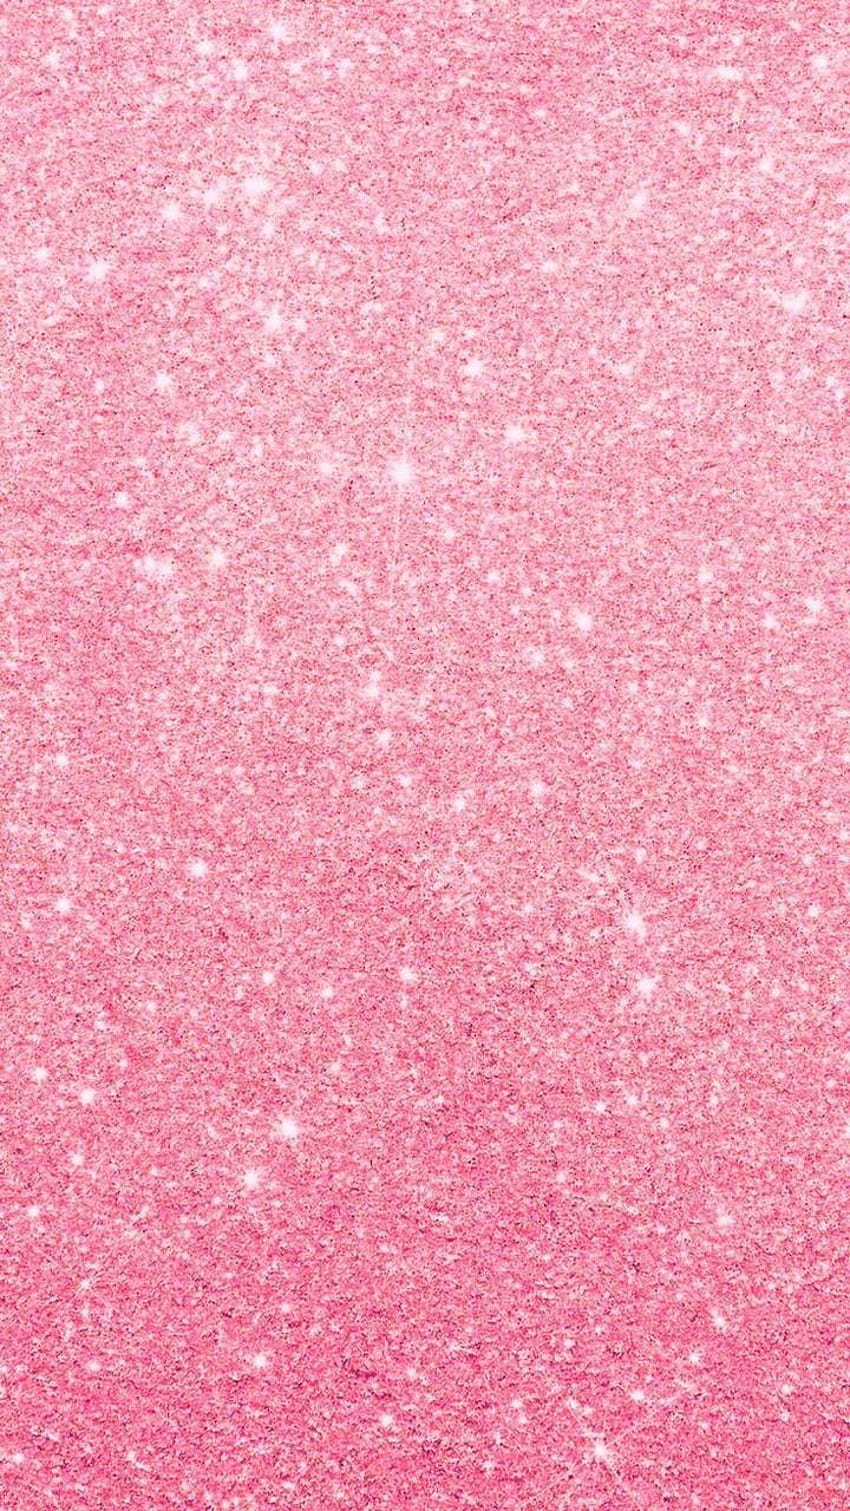 Pink Glitter 2020, pink sparkly HD phone wallpaper